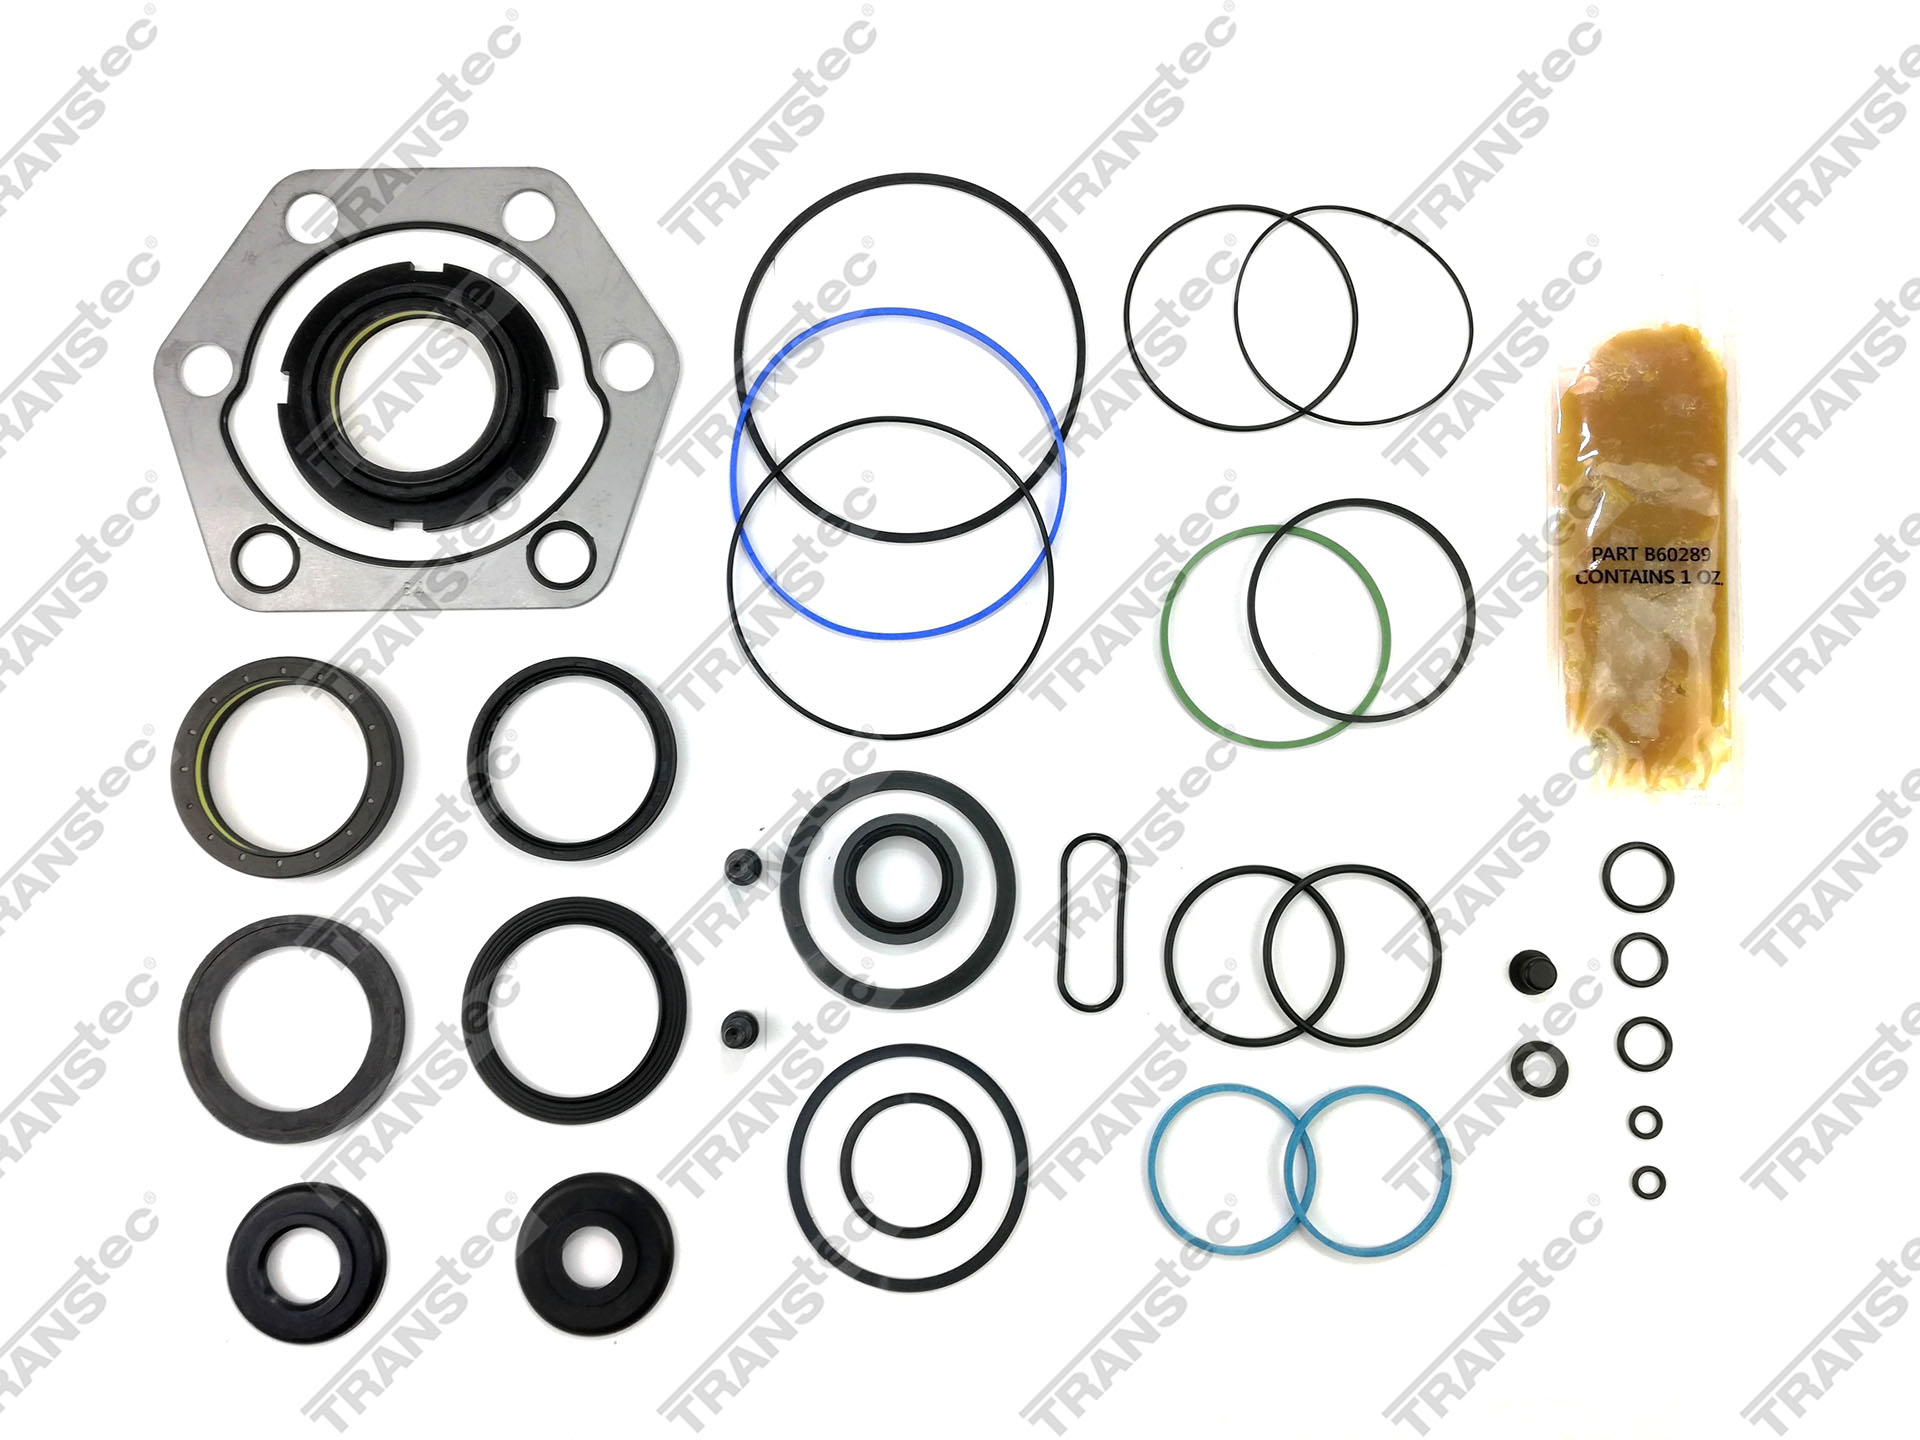 Seals /& Sealing Transtec 6064 Transmission Kit includes Paper /& Rubber Items